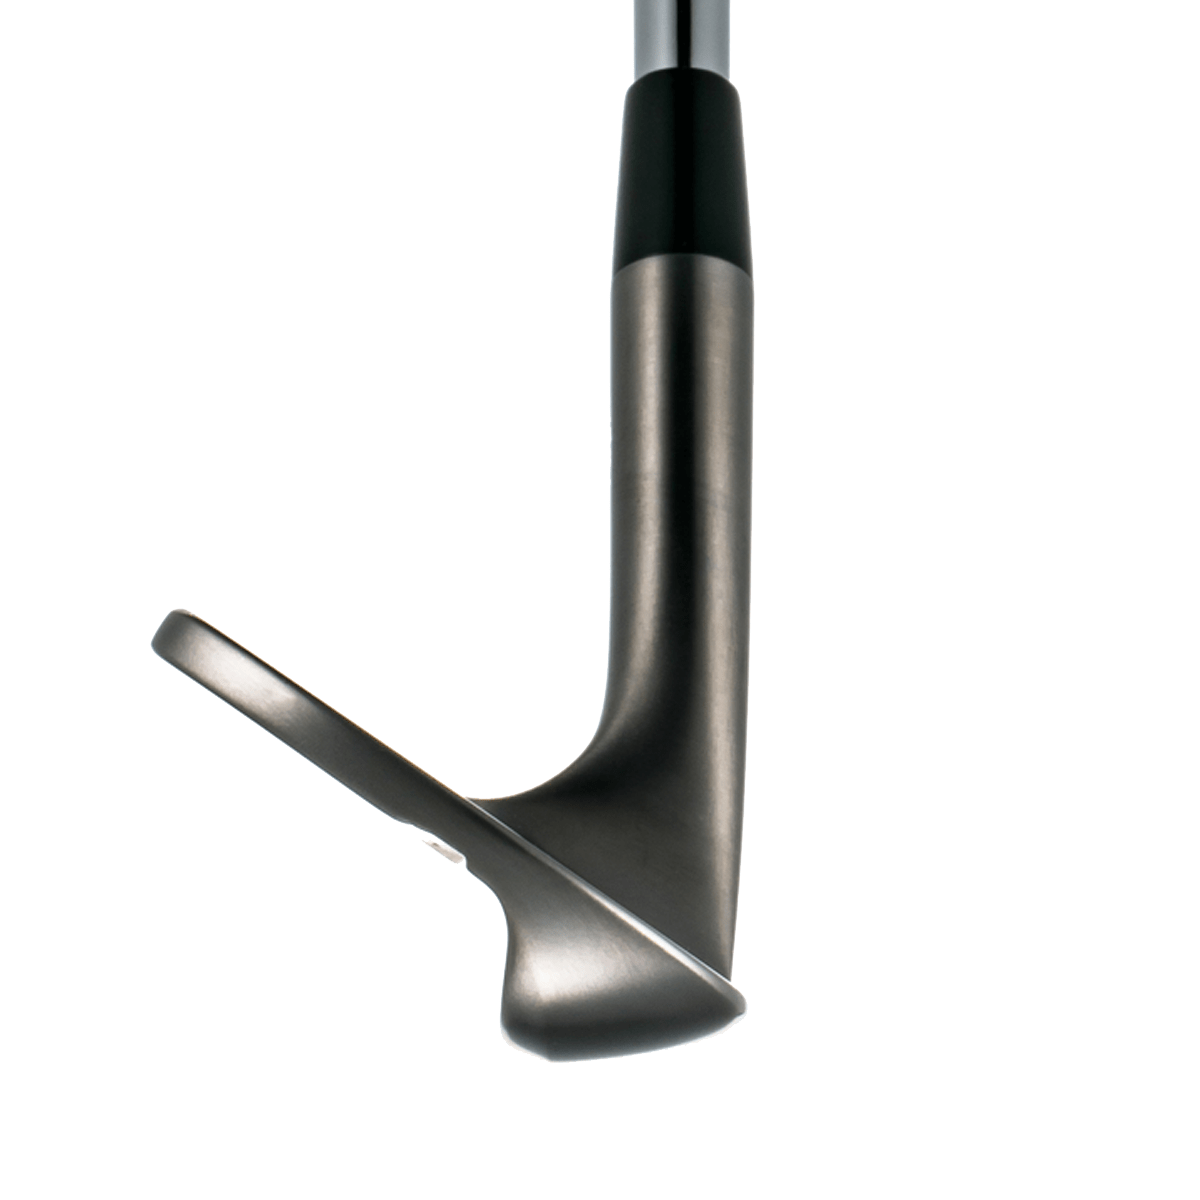 PROTOCONCEPT Golf, Forged Wedge - 21